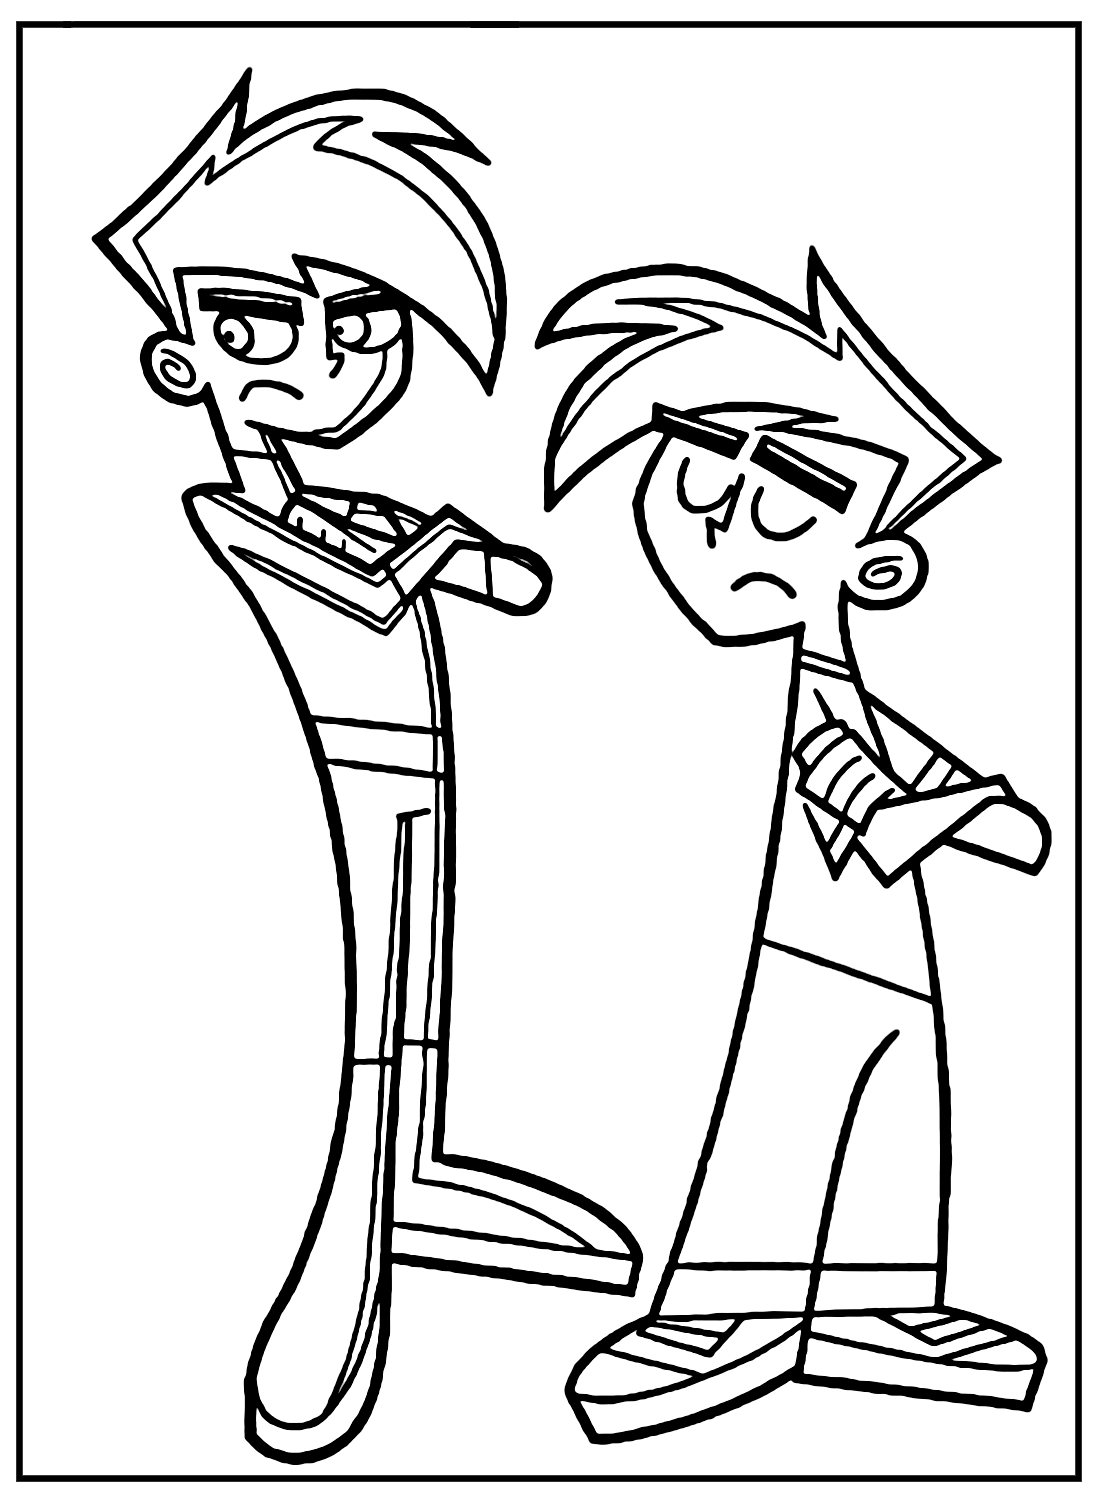 Characters From Danny Phantom Coloring Pages